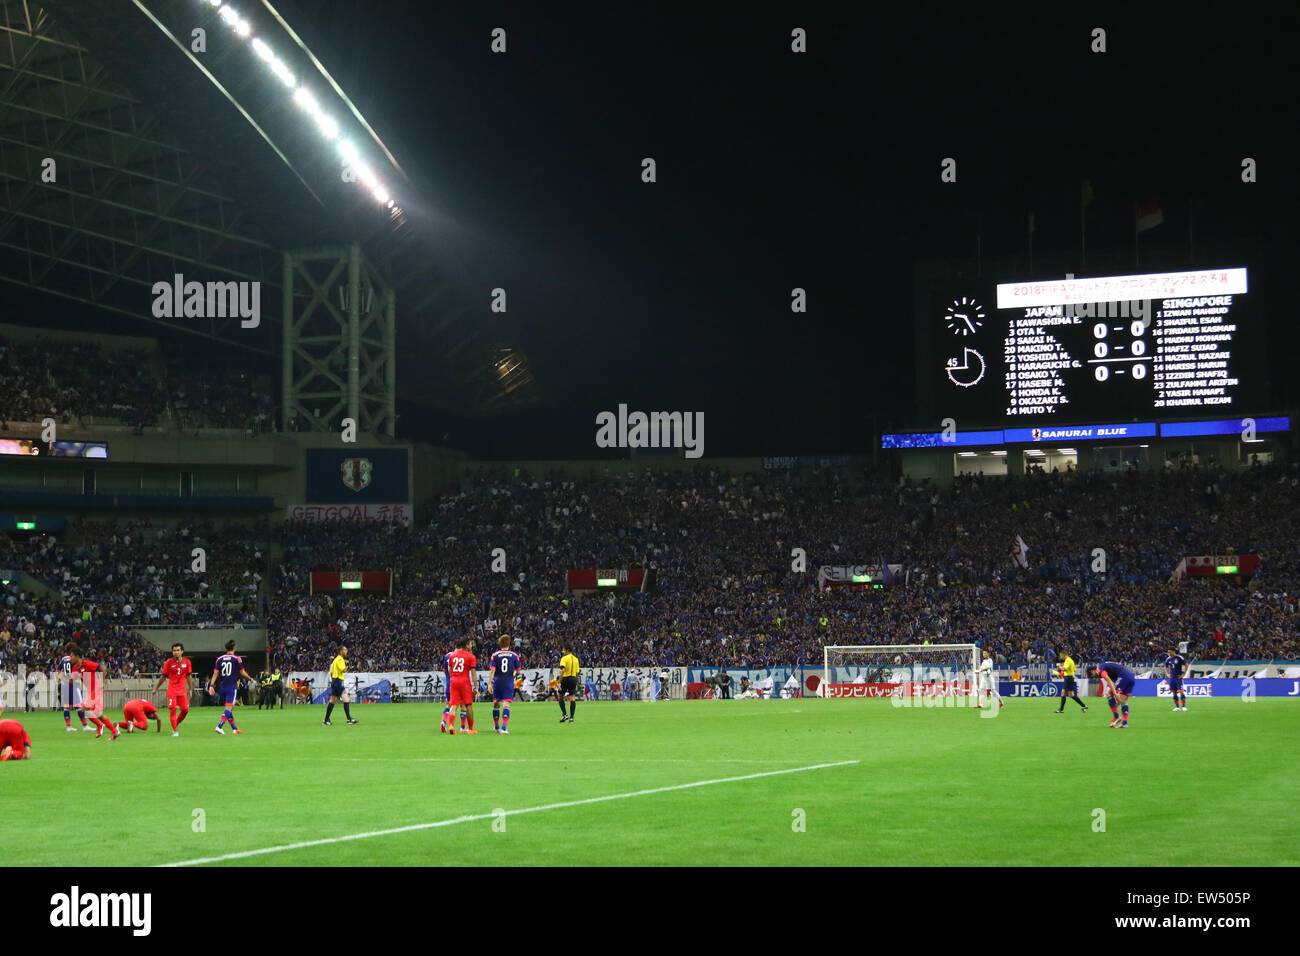 Saitama, Japan. 16th June, 2015. General view Football/Soccer : The scoreboard shows the final score after the FIFA World Cup Russia 2018 Asian Qualifiers Second round Group E match between Japan 0-0 Singapore at Saitama Stadium 2002 in Saitama, Japan . © Kenzaburo Matsuoka/AFLO/Alamy Live News Stock Photo